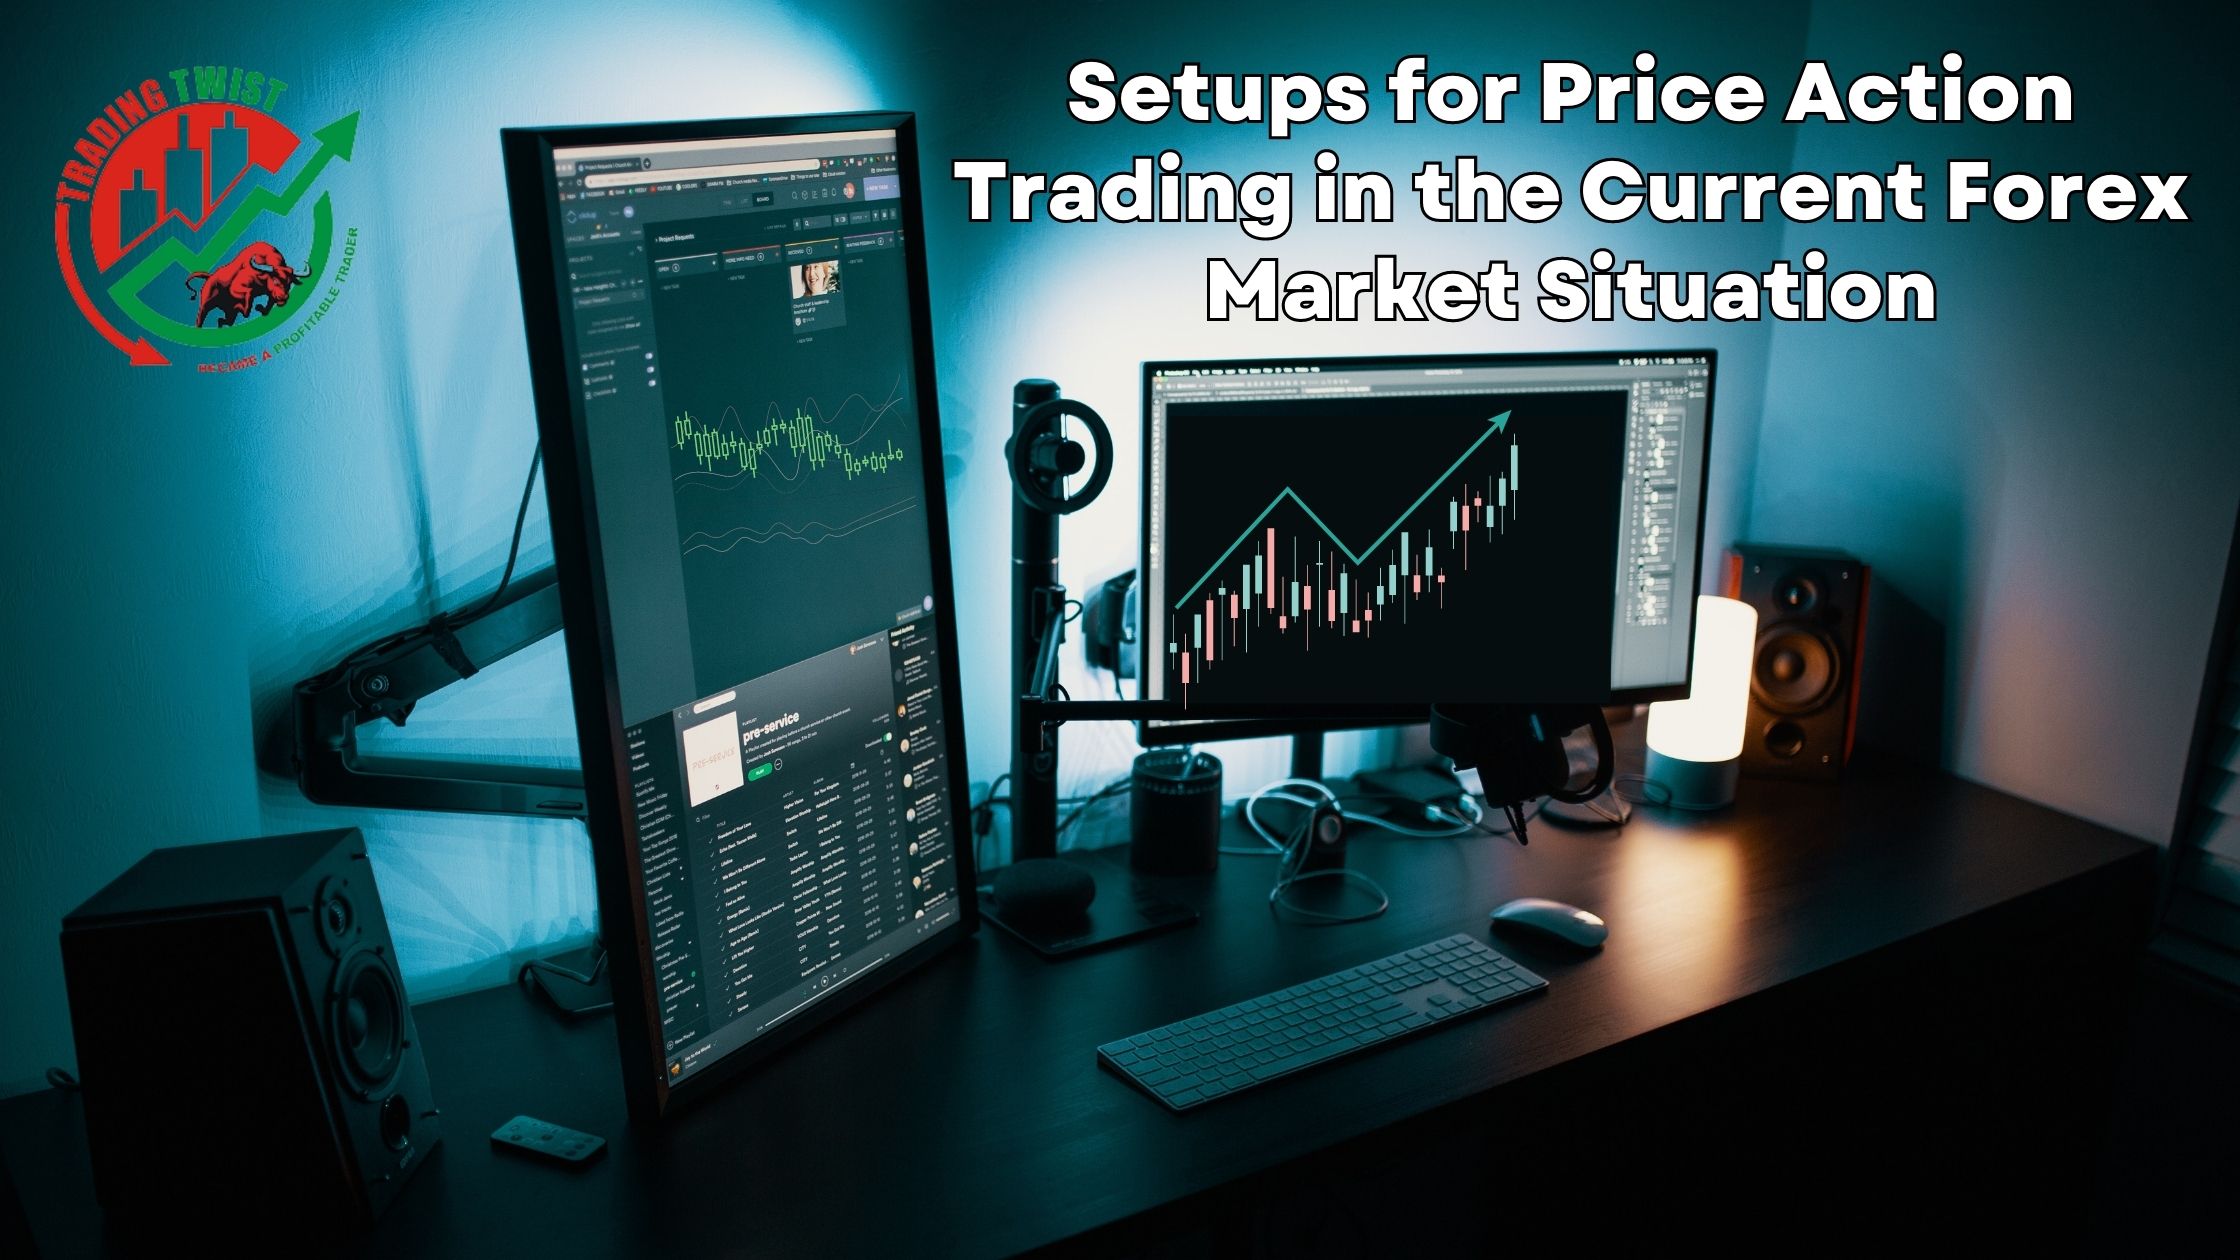 Setups for Price Action Trading in the Current Forex Market Situation